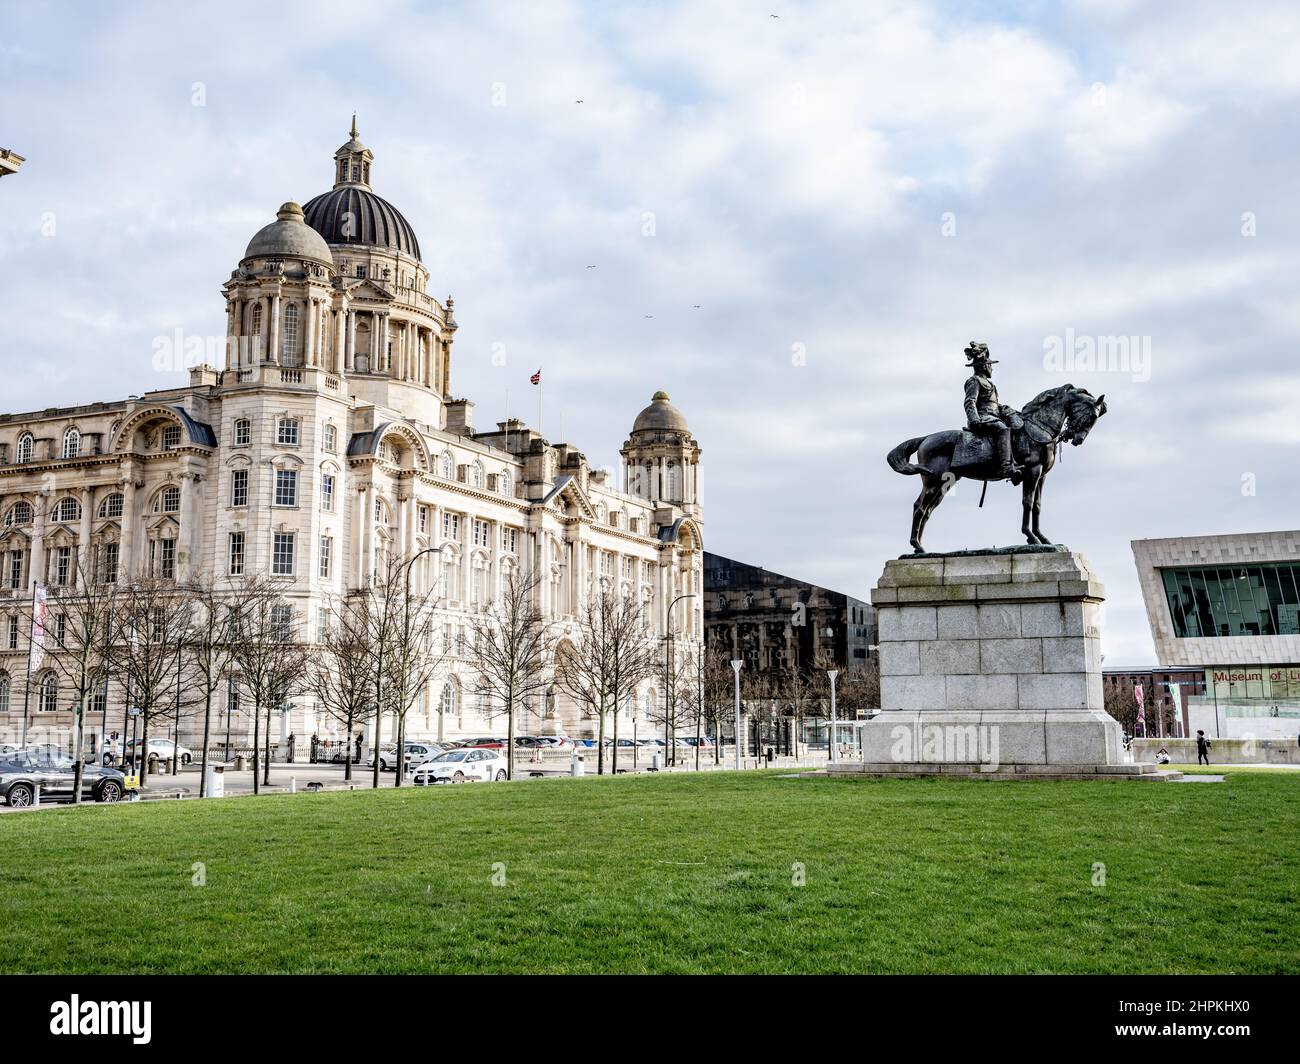 Port of Liverpool Building, Pierhead, Liverpool, with statue of King Edward 7th in the foreground. Stock Photo